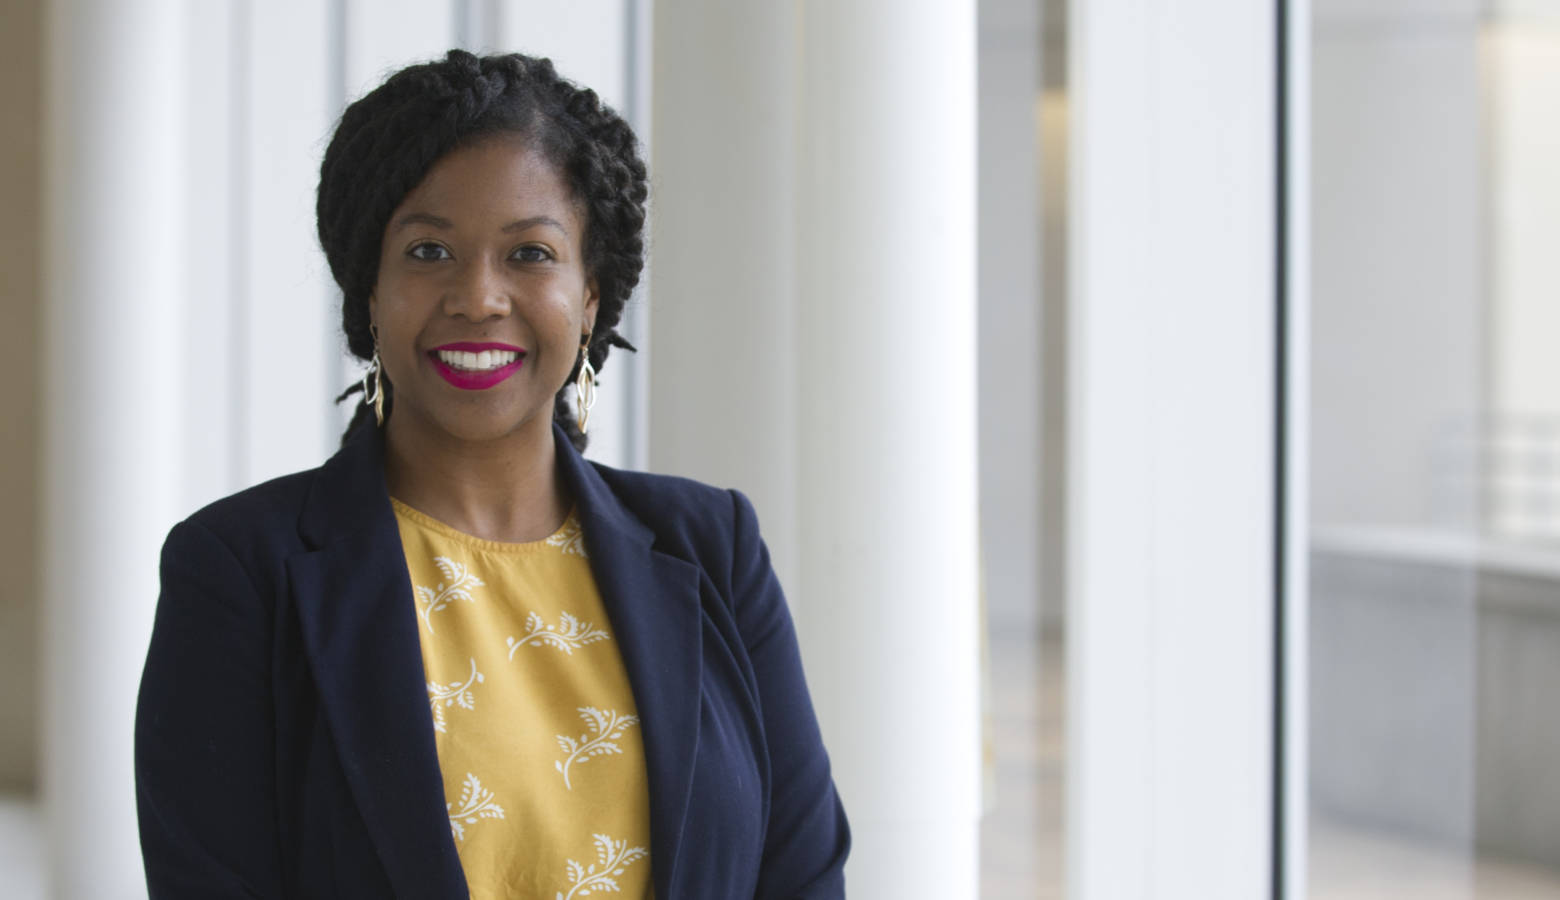 Breanca Merritt is the director of the new Center for Research on Inclusion and Social Policy. (Photo courtesy of IUPUI)